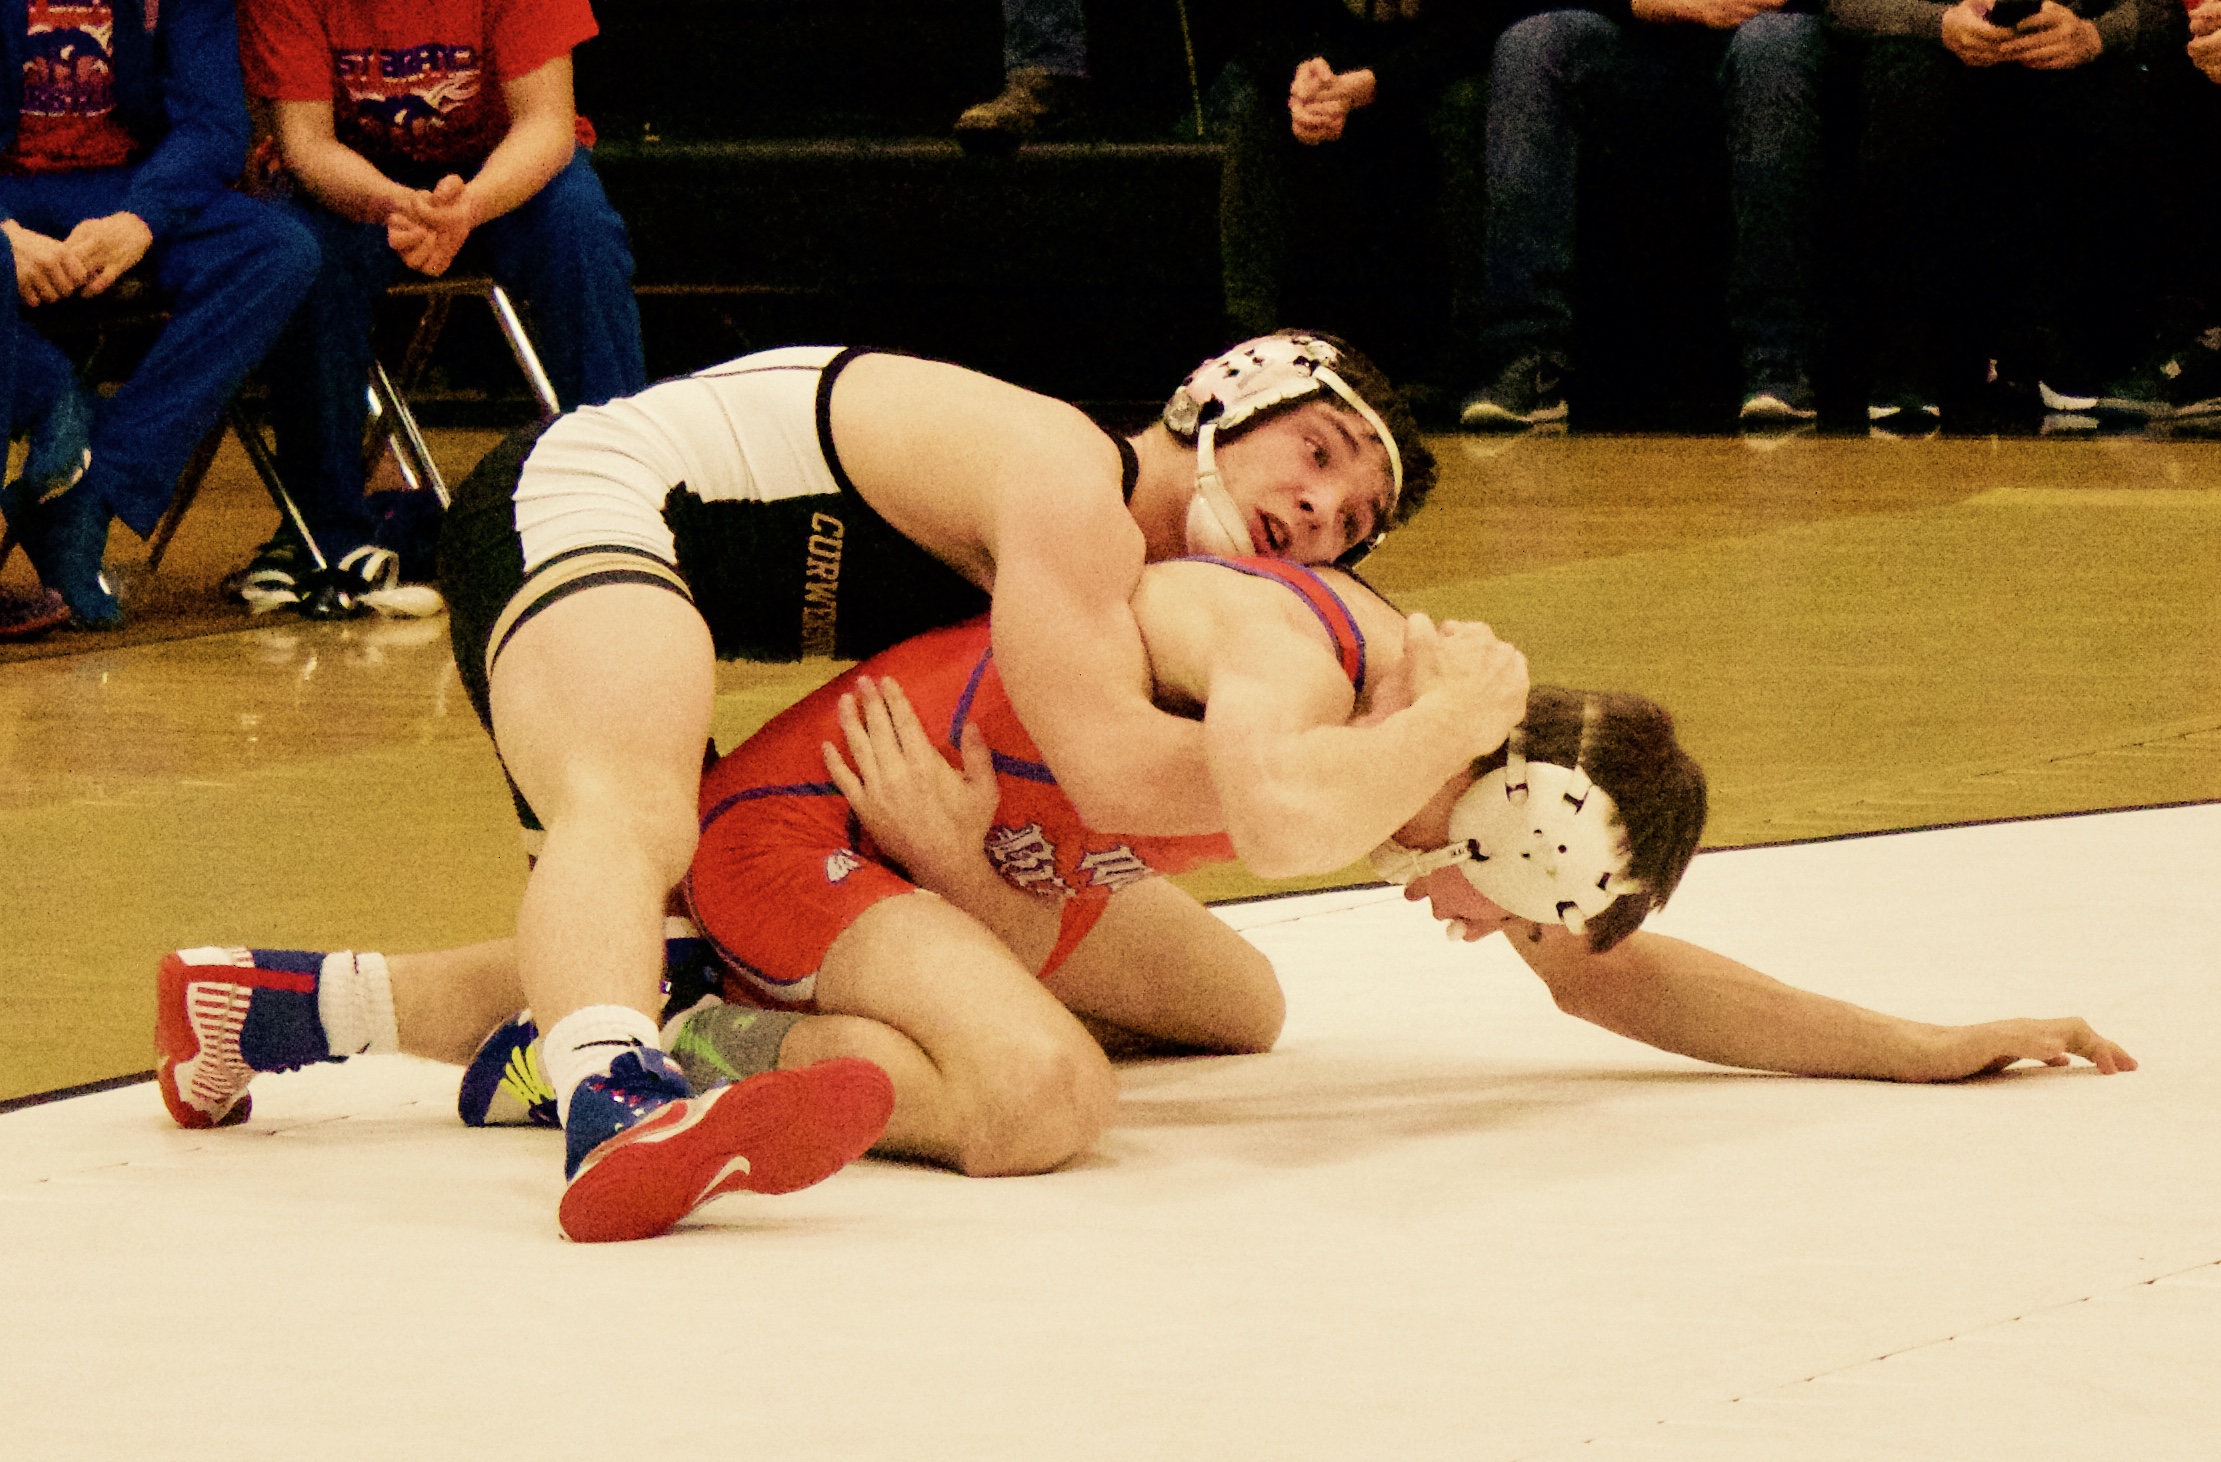 Blake Passarelli works a gut wrenching tight waist and half nelson. He won his match 3-2 (Photo by HL)